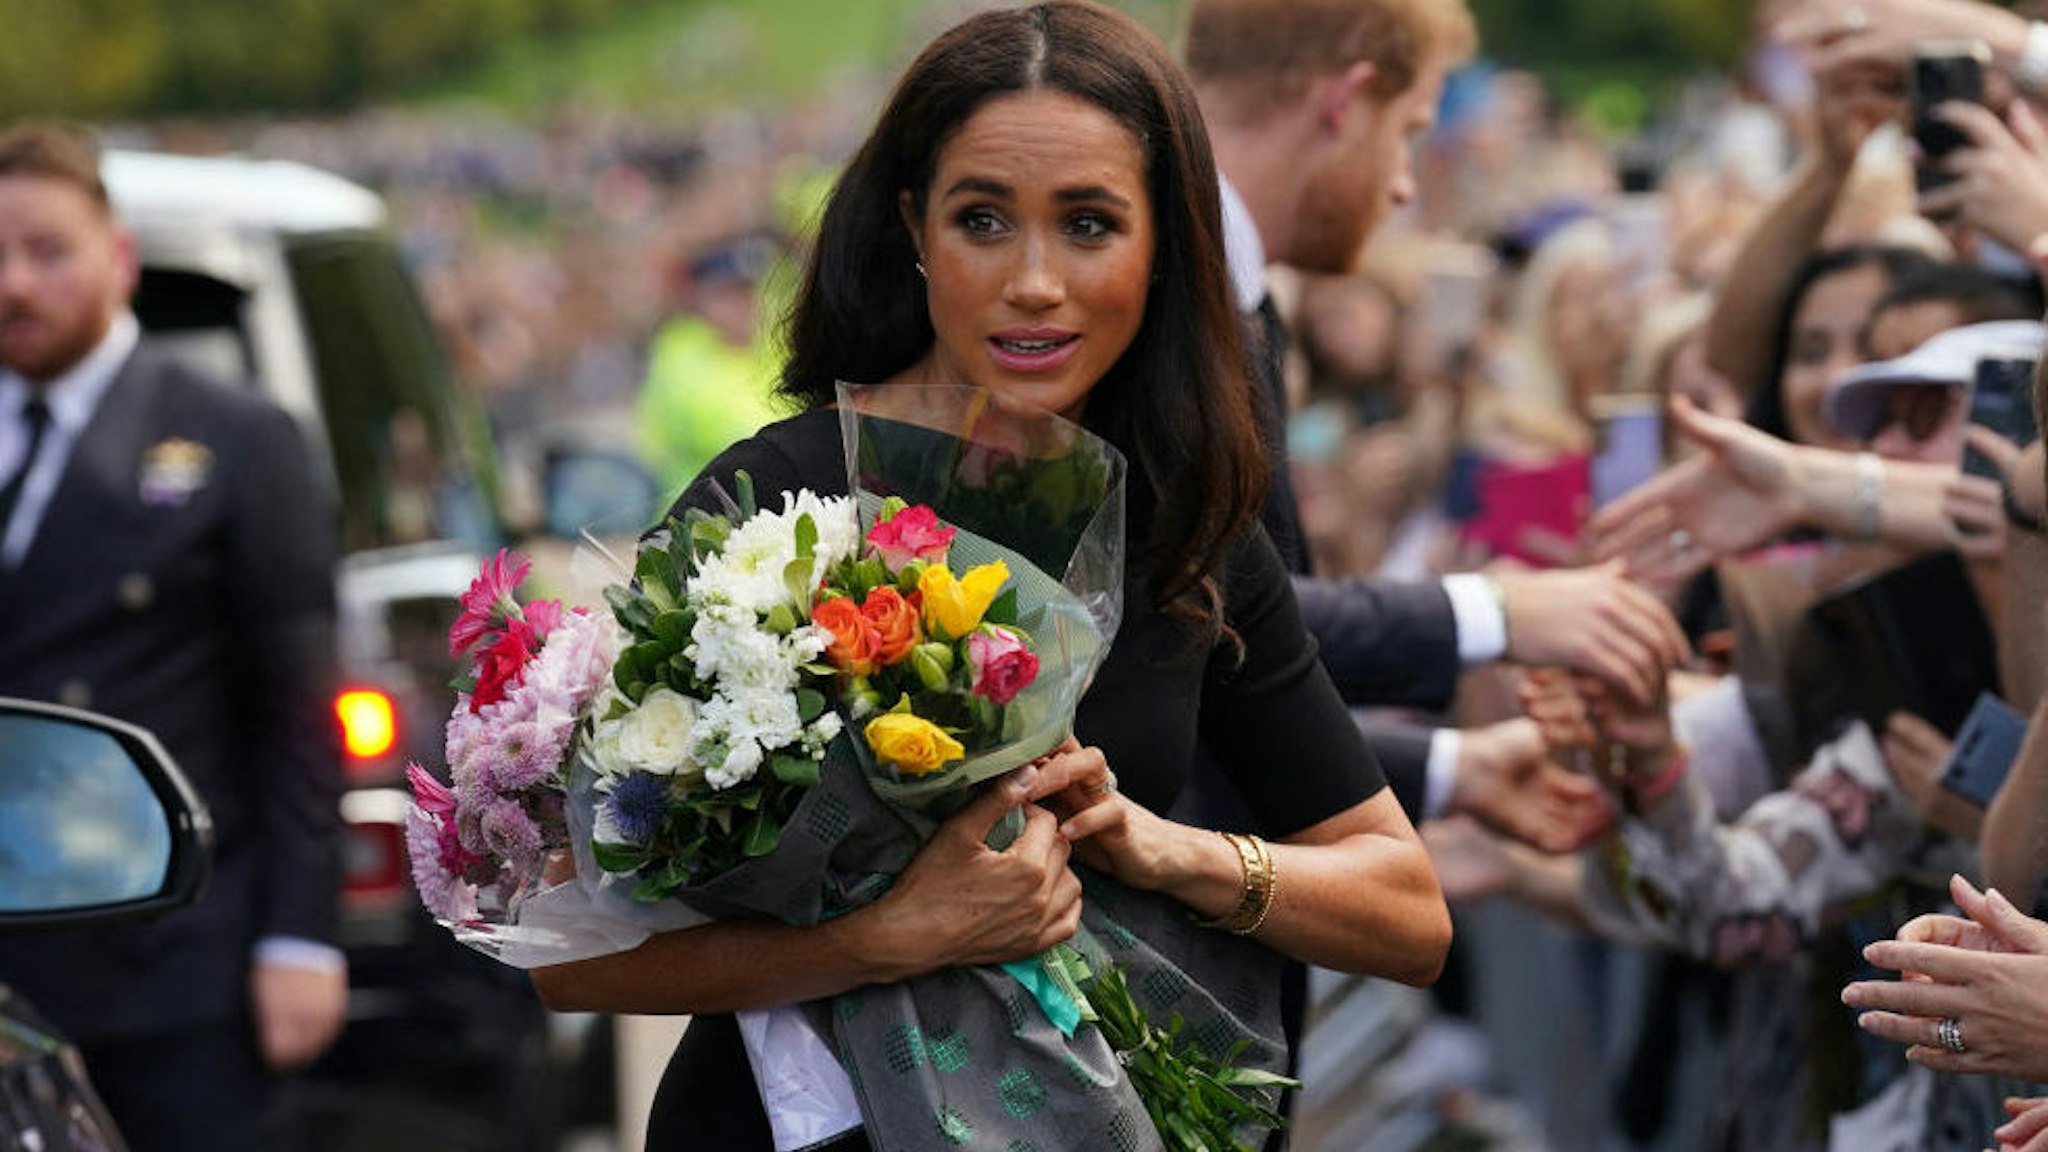 Meghan, Duchess of Sussex collects flowers as she chats with well-wishers on the Long walk at Windsor Castle on September 10, 2022, two days after the death of Britain's Queen Elizabeth II at the age of 96.